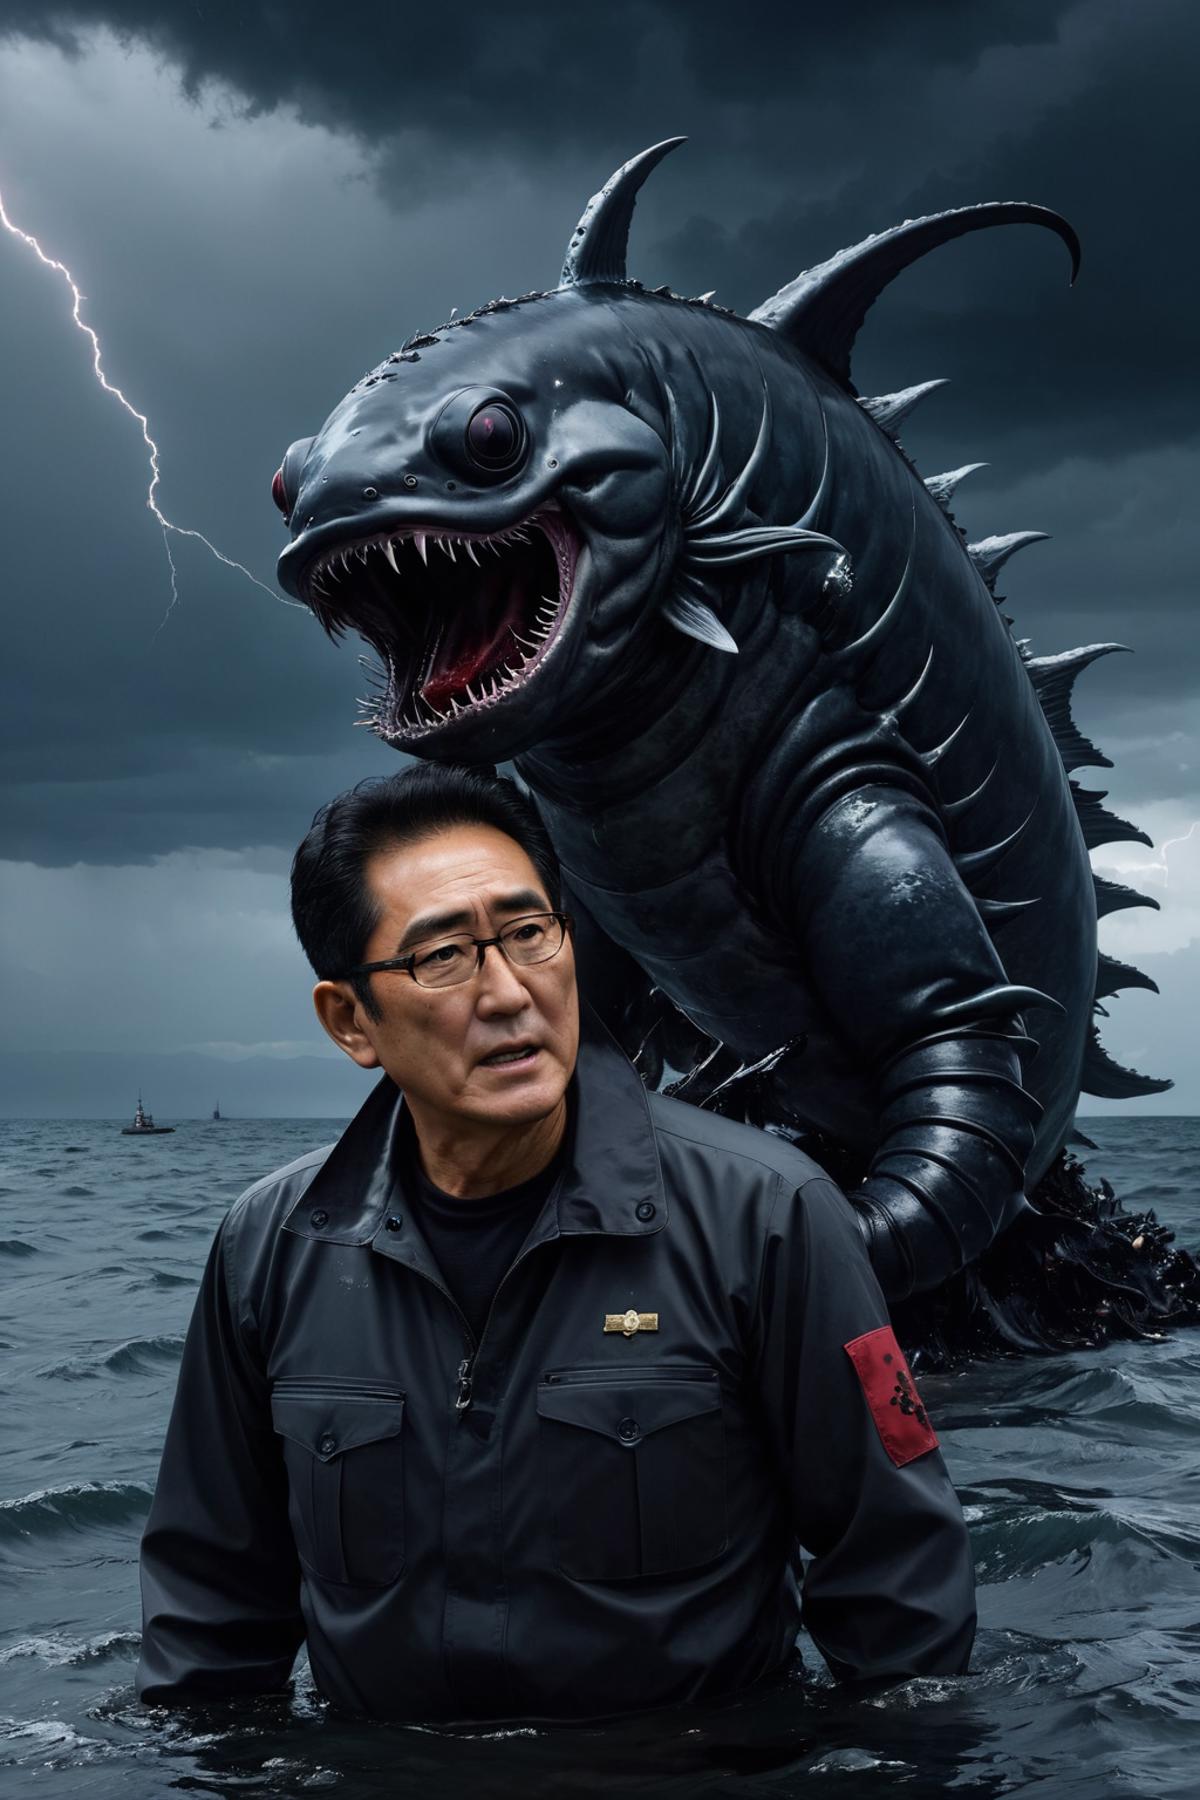 A man standing in front of a giant sea monster or fish.